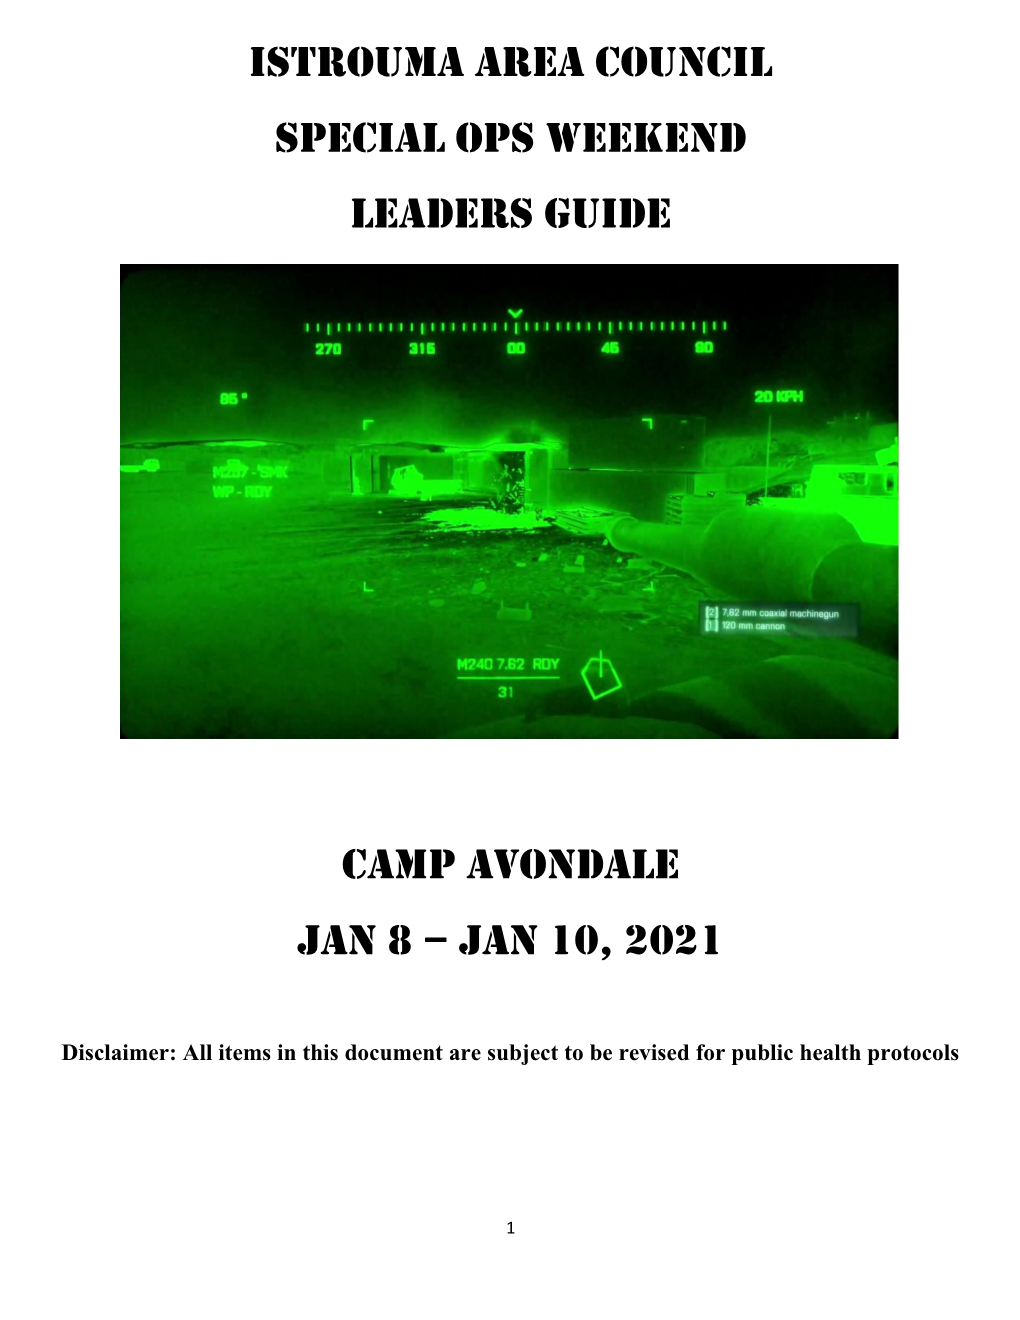 Istrouma Area Council Special Ops Weekend Leaders Guide Camp